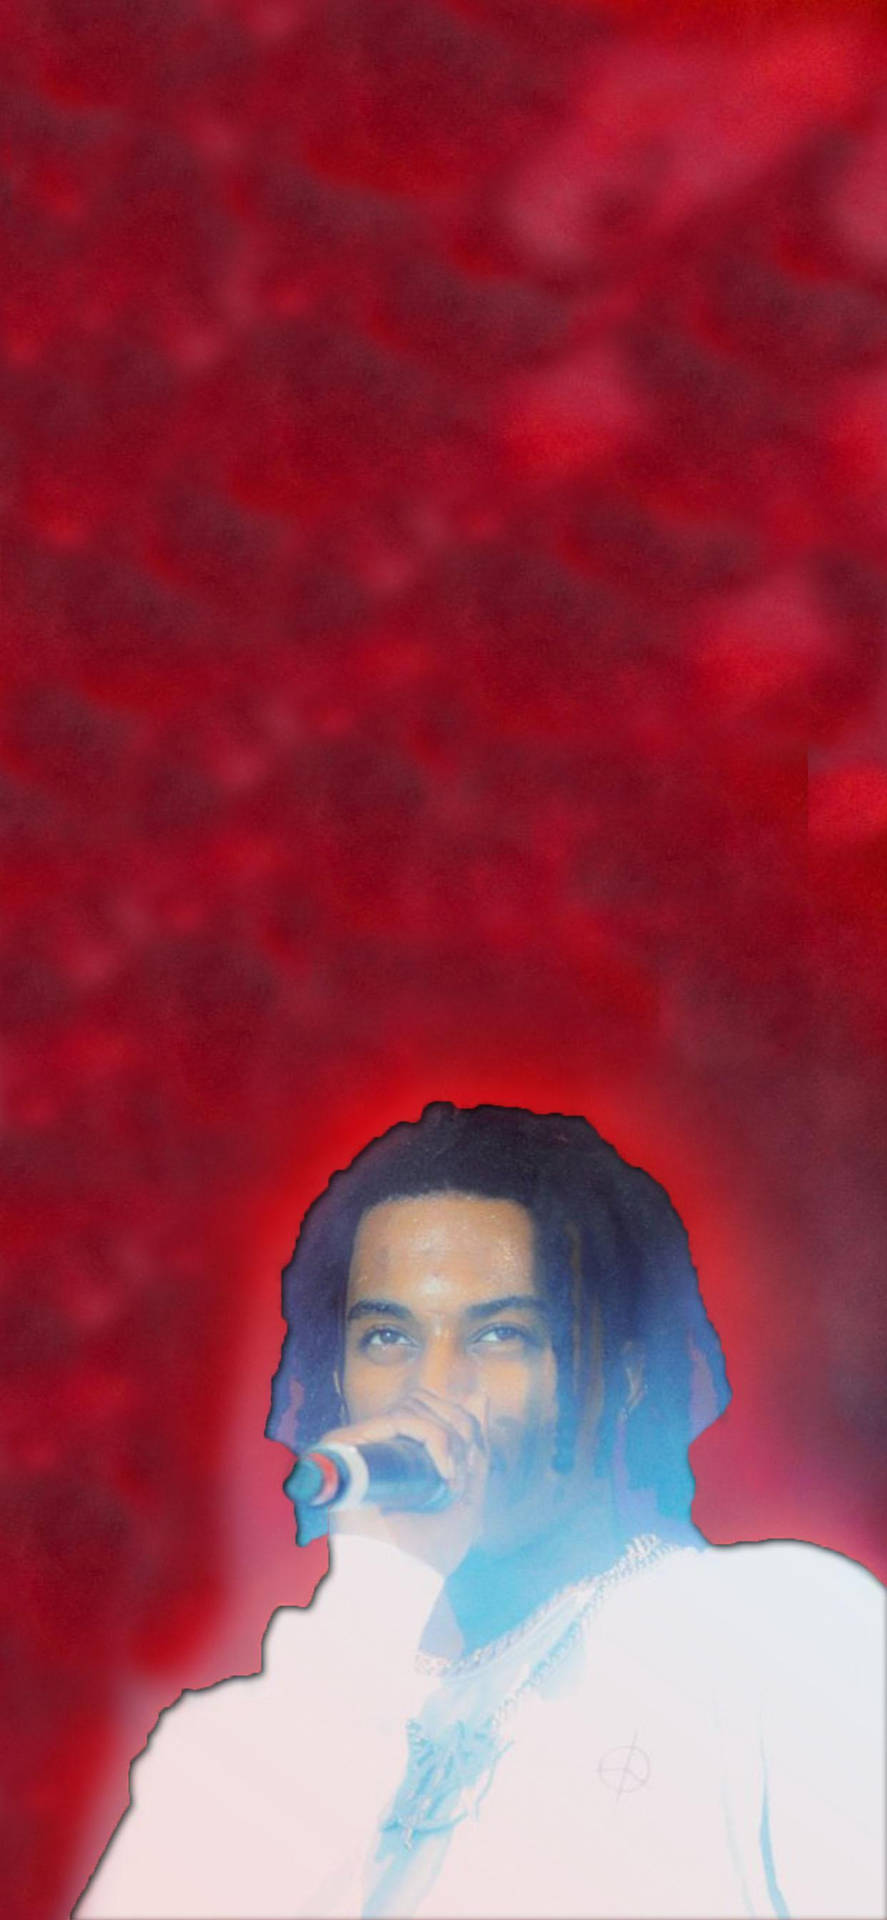 Whole Lotta Red Iphone Wallpaper